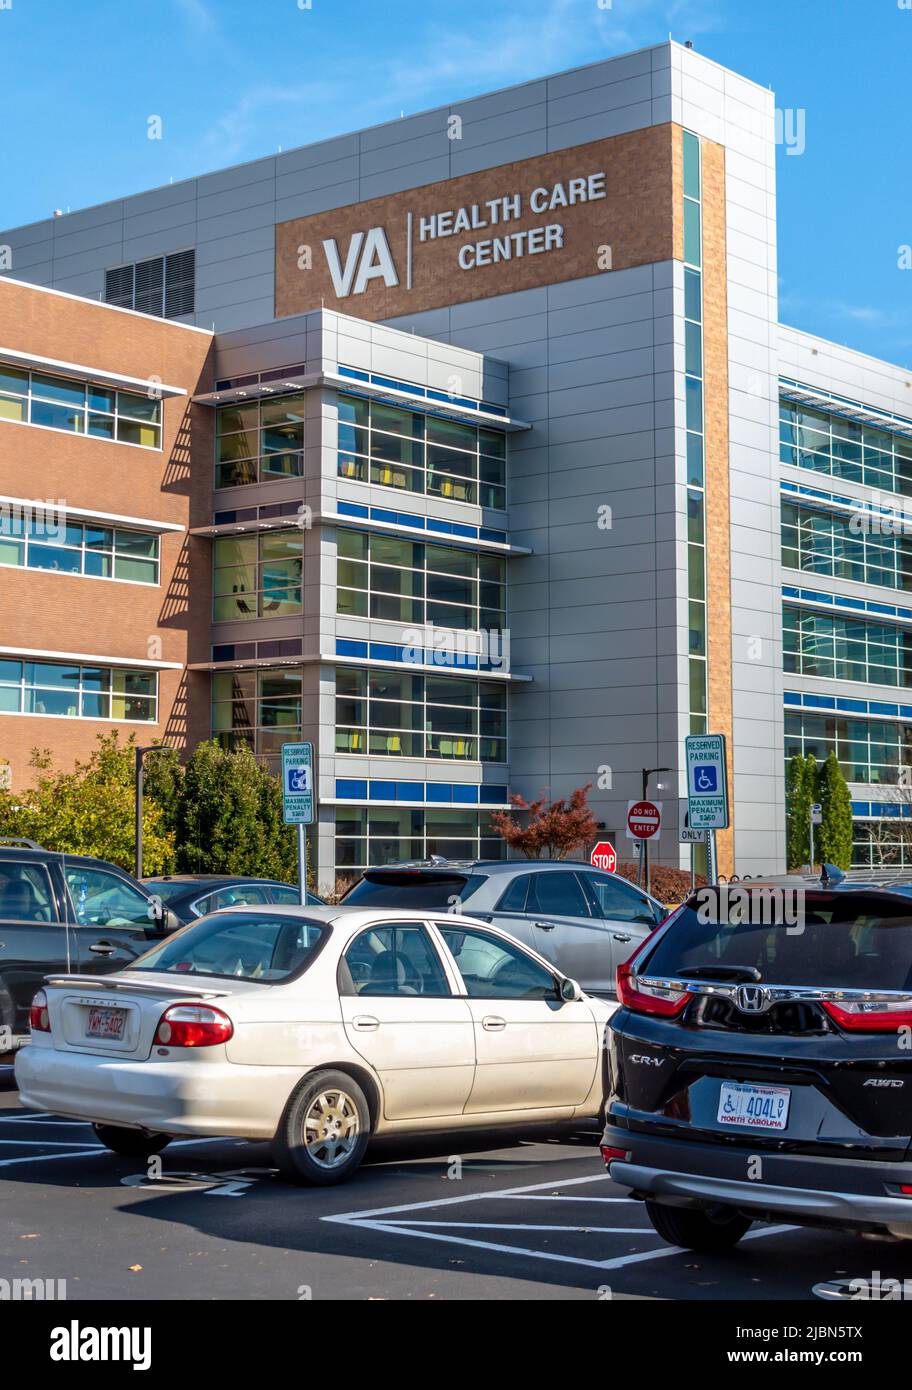 VA Health Care Center's exterior facade brand and logo signage on a bright sunny day with blue sky, hazy clouds, floors, windows, and parked vehicles. Stock Photo